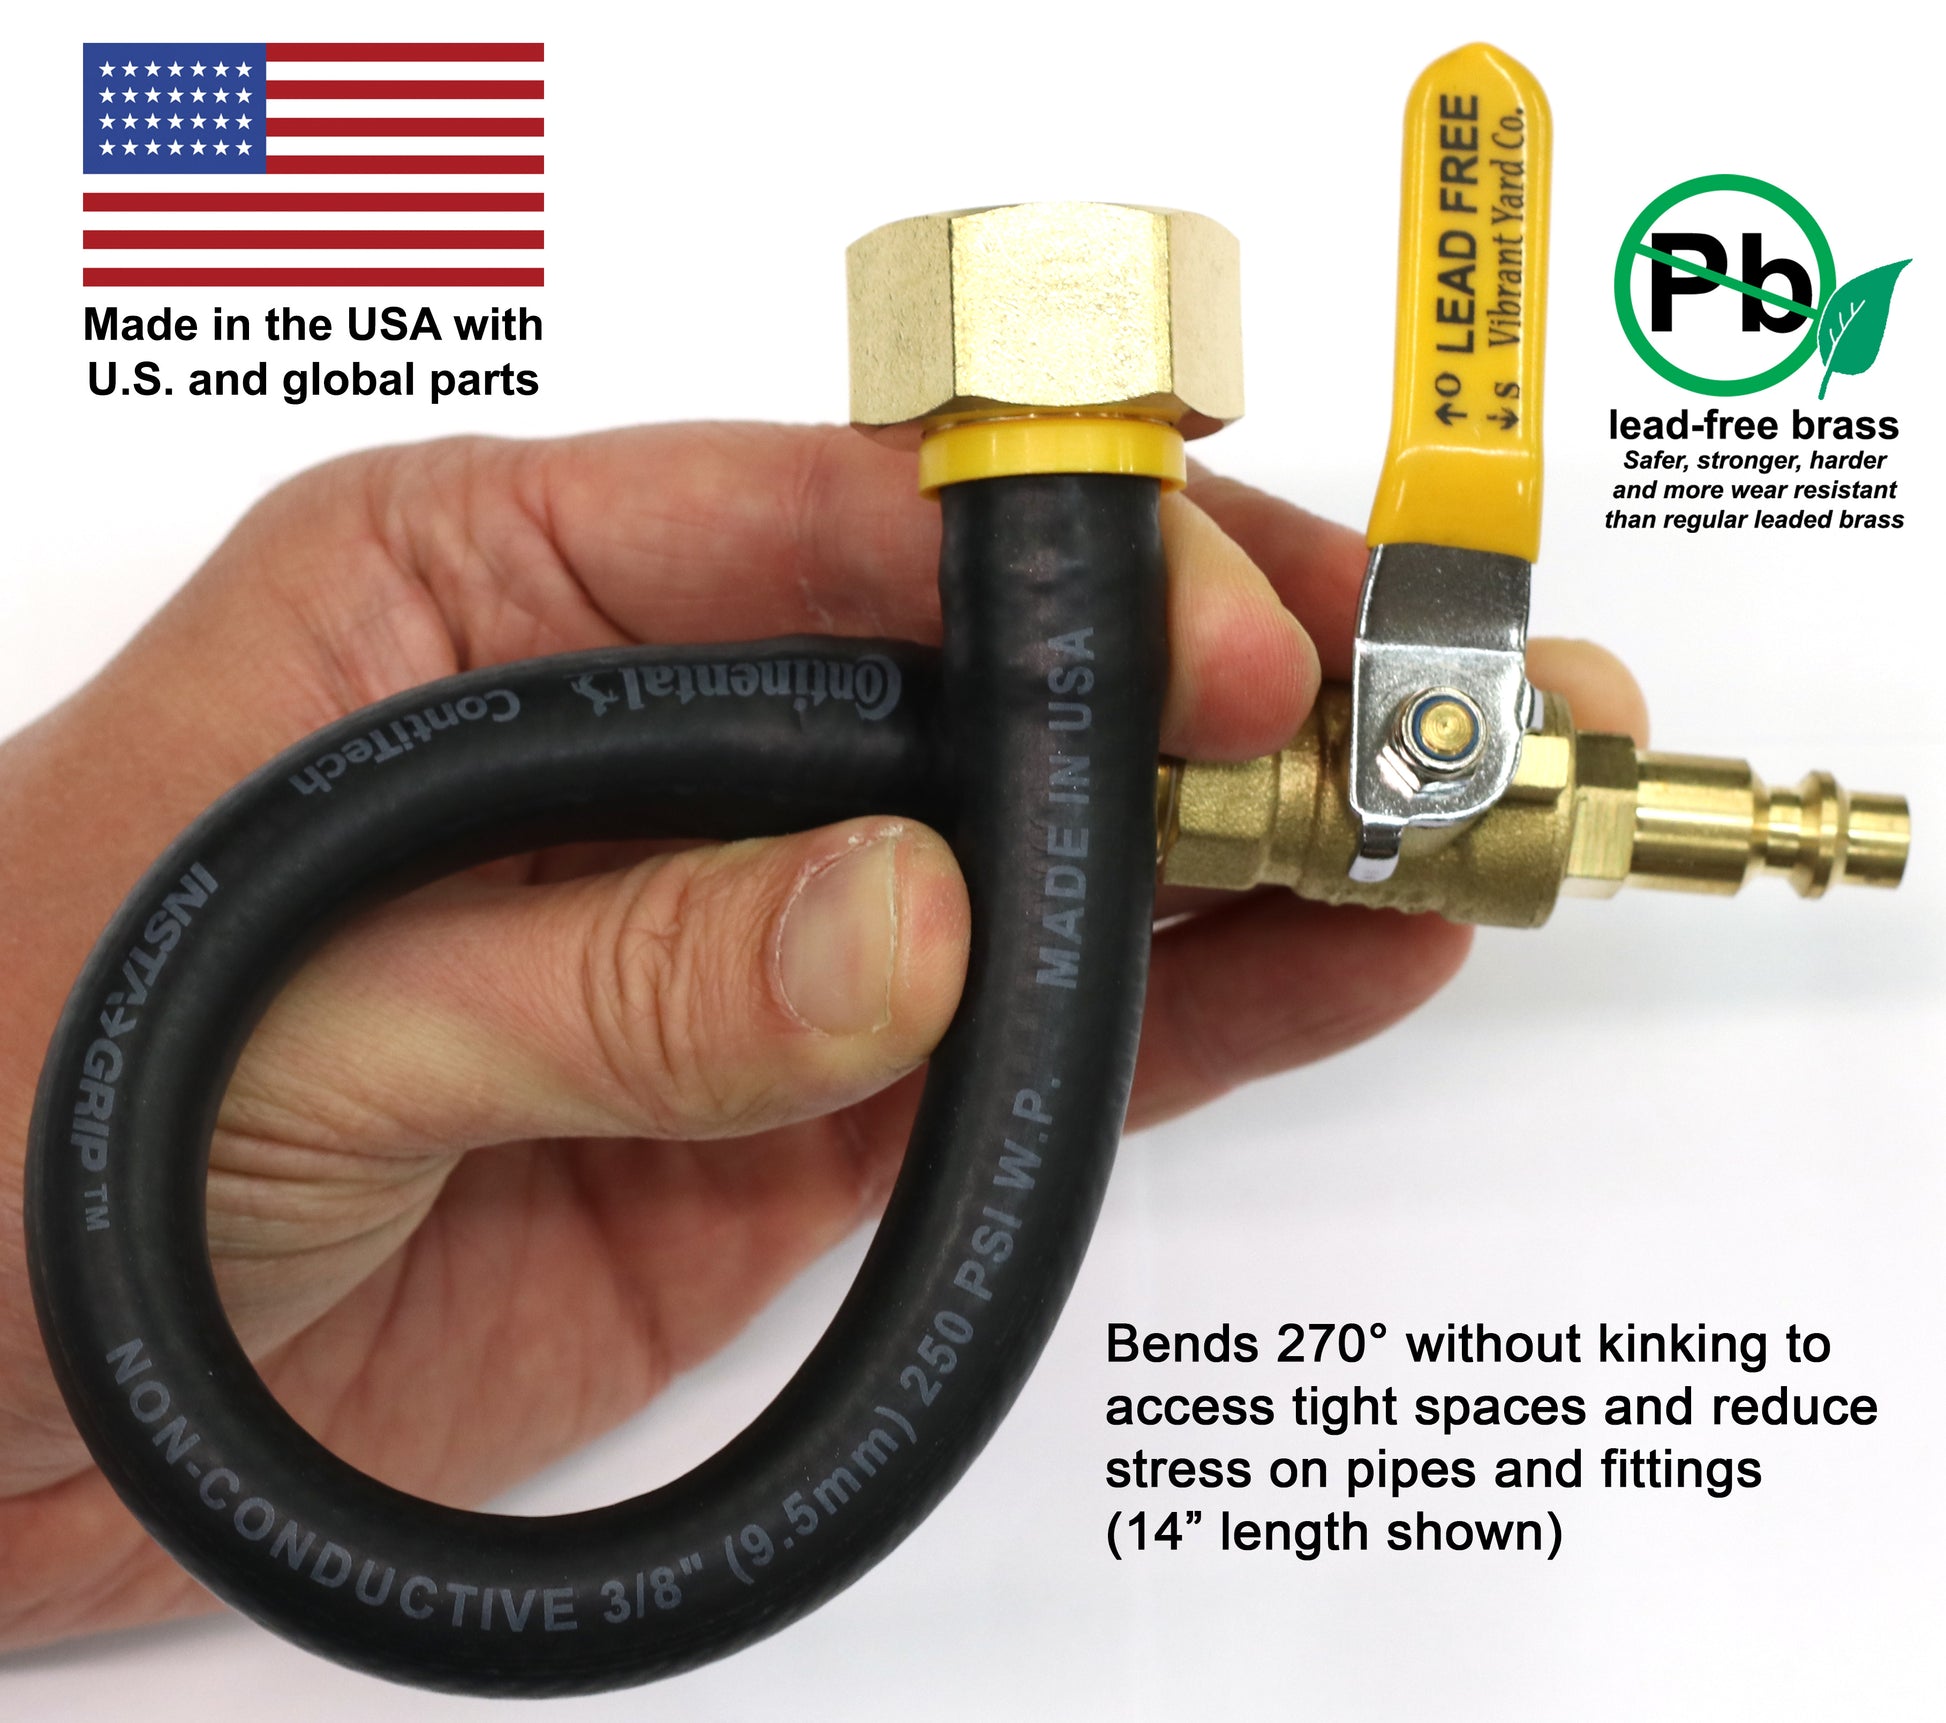 Winterize Sprinkler Systems and Outdoor Faucets: Air Compressor Quick-Connect Plug To Female Garden Hose Faucet Blow Out Adapter with Shut Off Valve (Lead-Free Brass), Industrial Plug